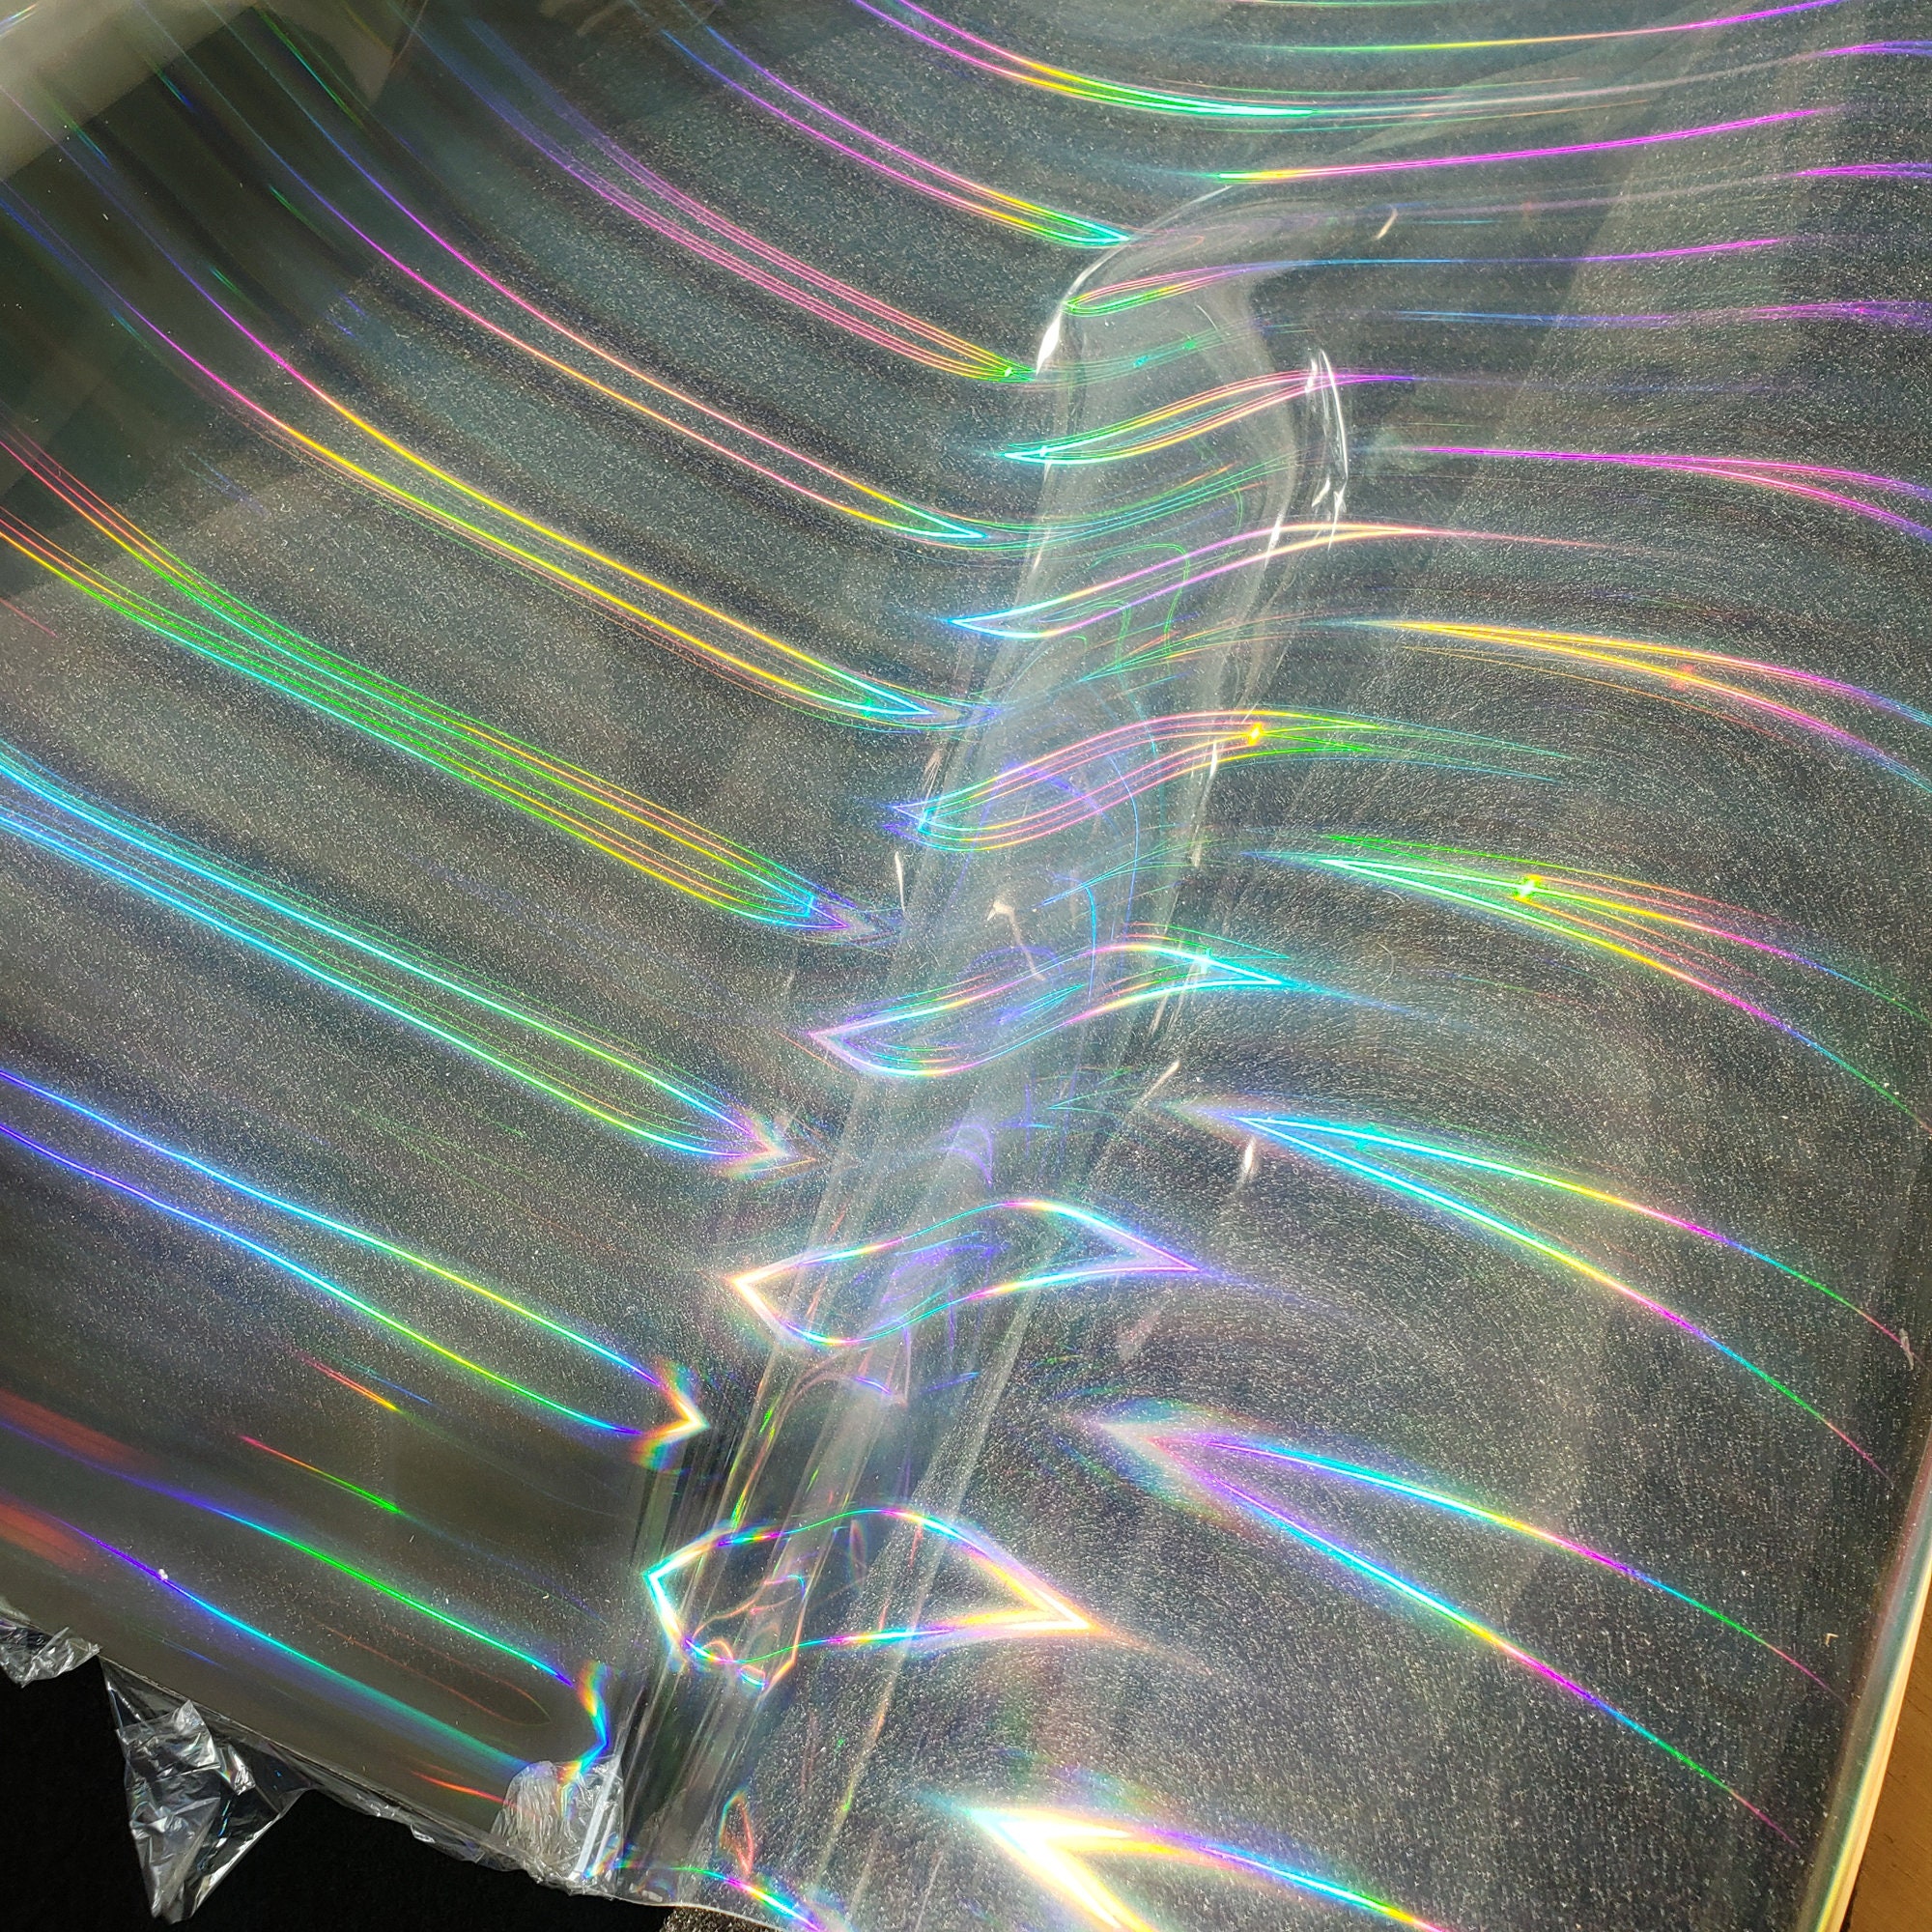 5pcs/set Transparent Holographic Vinyl Sheet,mirror Iridescent Pvc Jelly  Sheet,waterproof Jelly Sheets for Pool Bows 